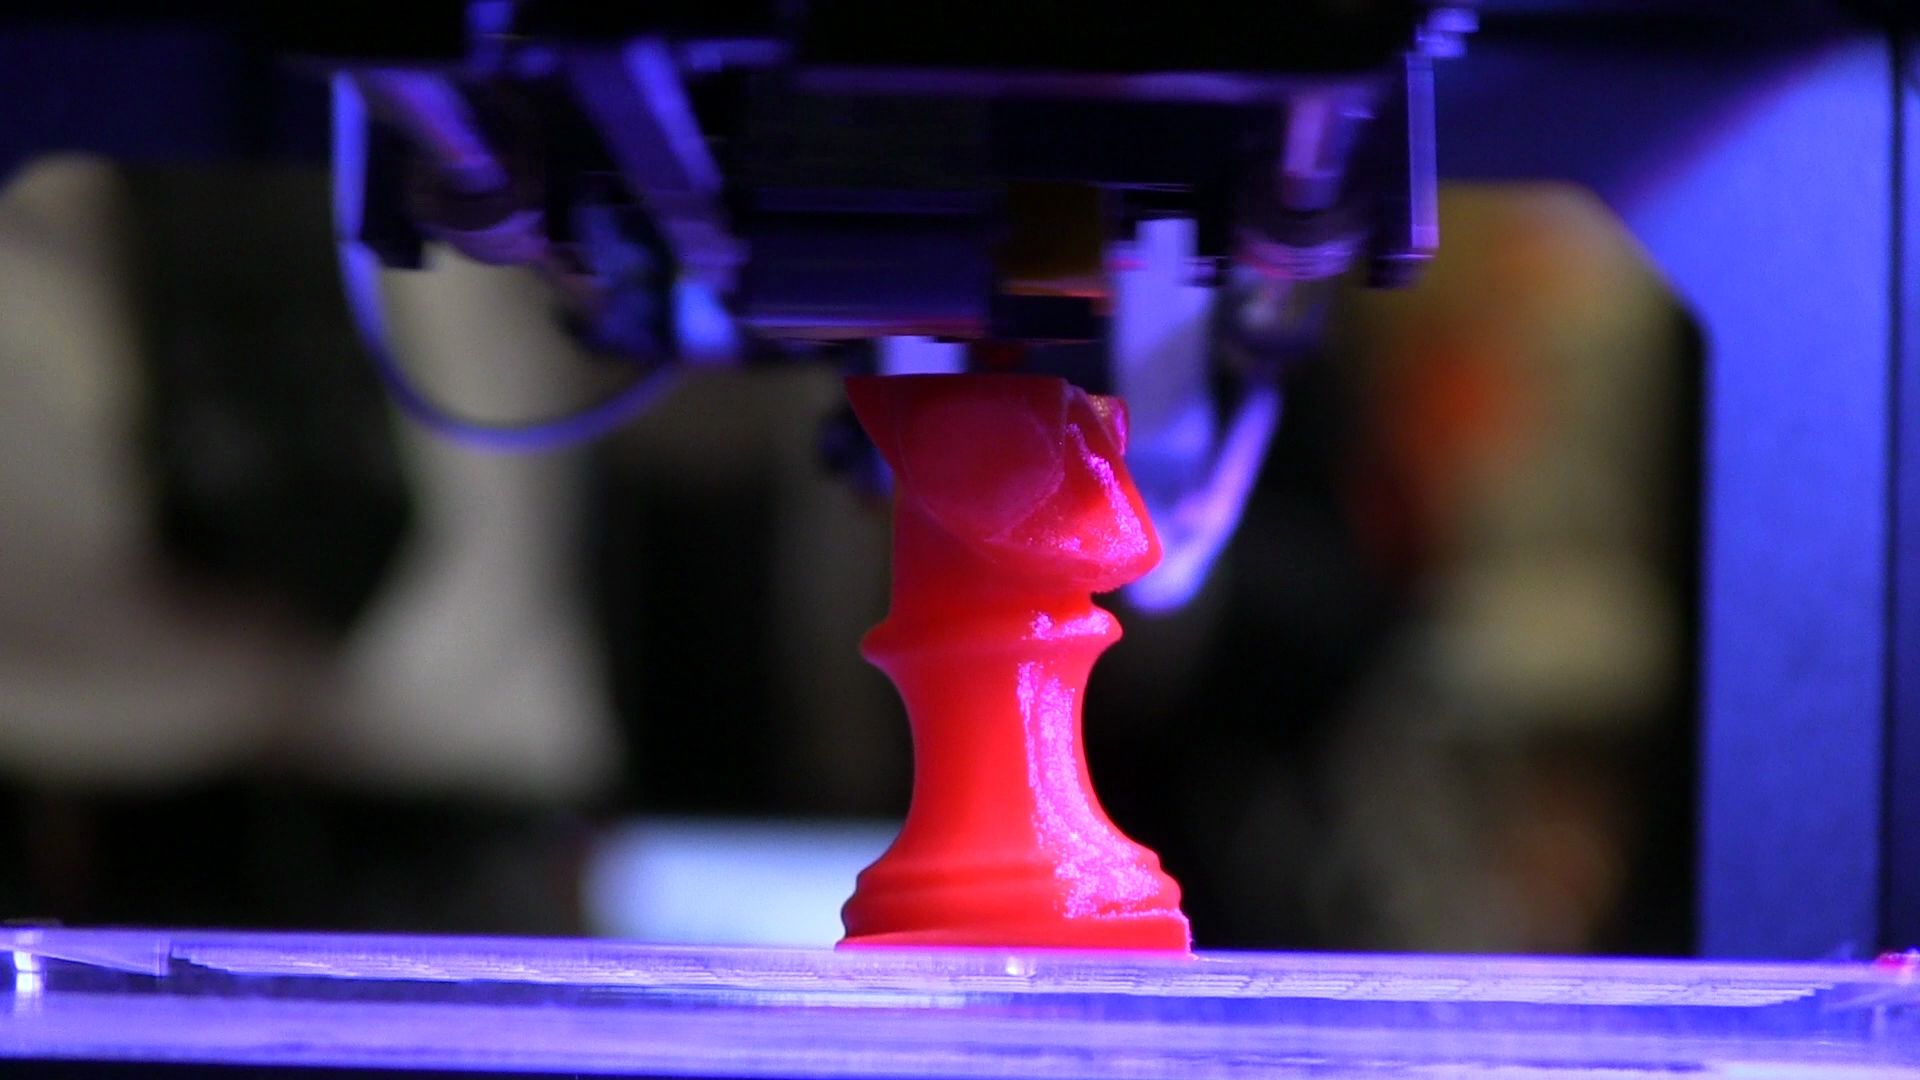 Watch Ways 3d Printing Will Impact Your Life